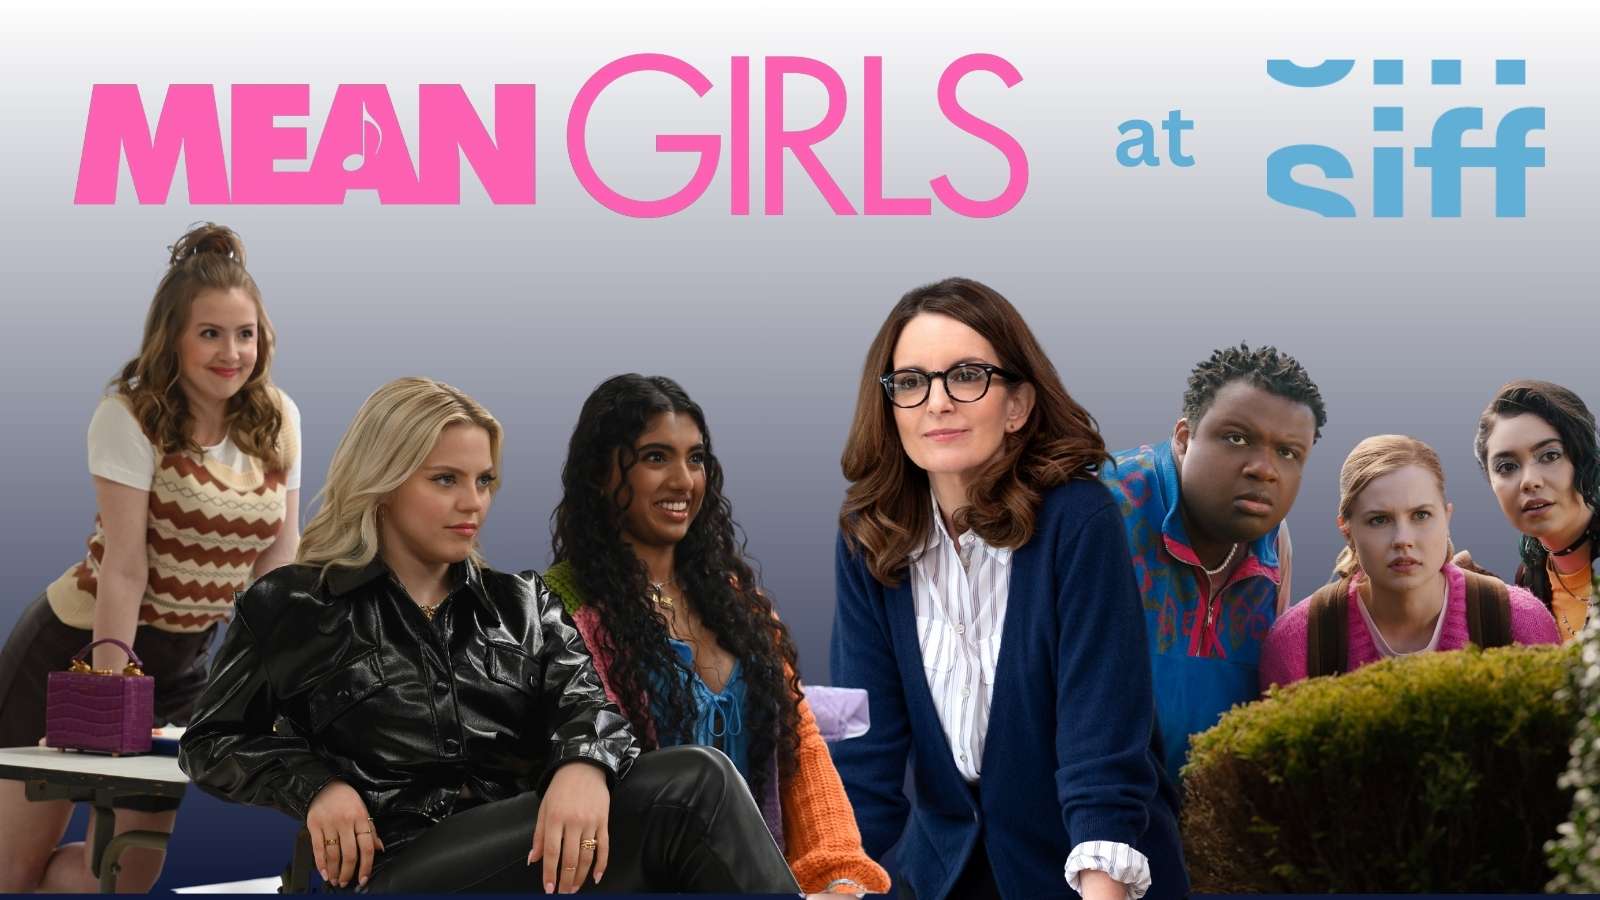 Mean Girls Events at SIFF